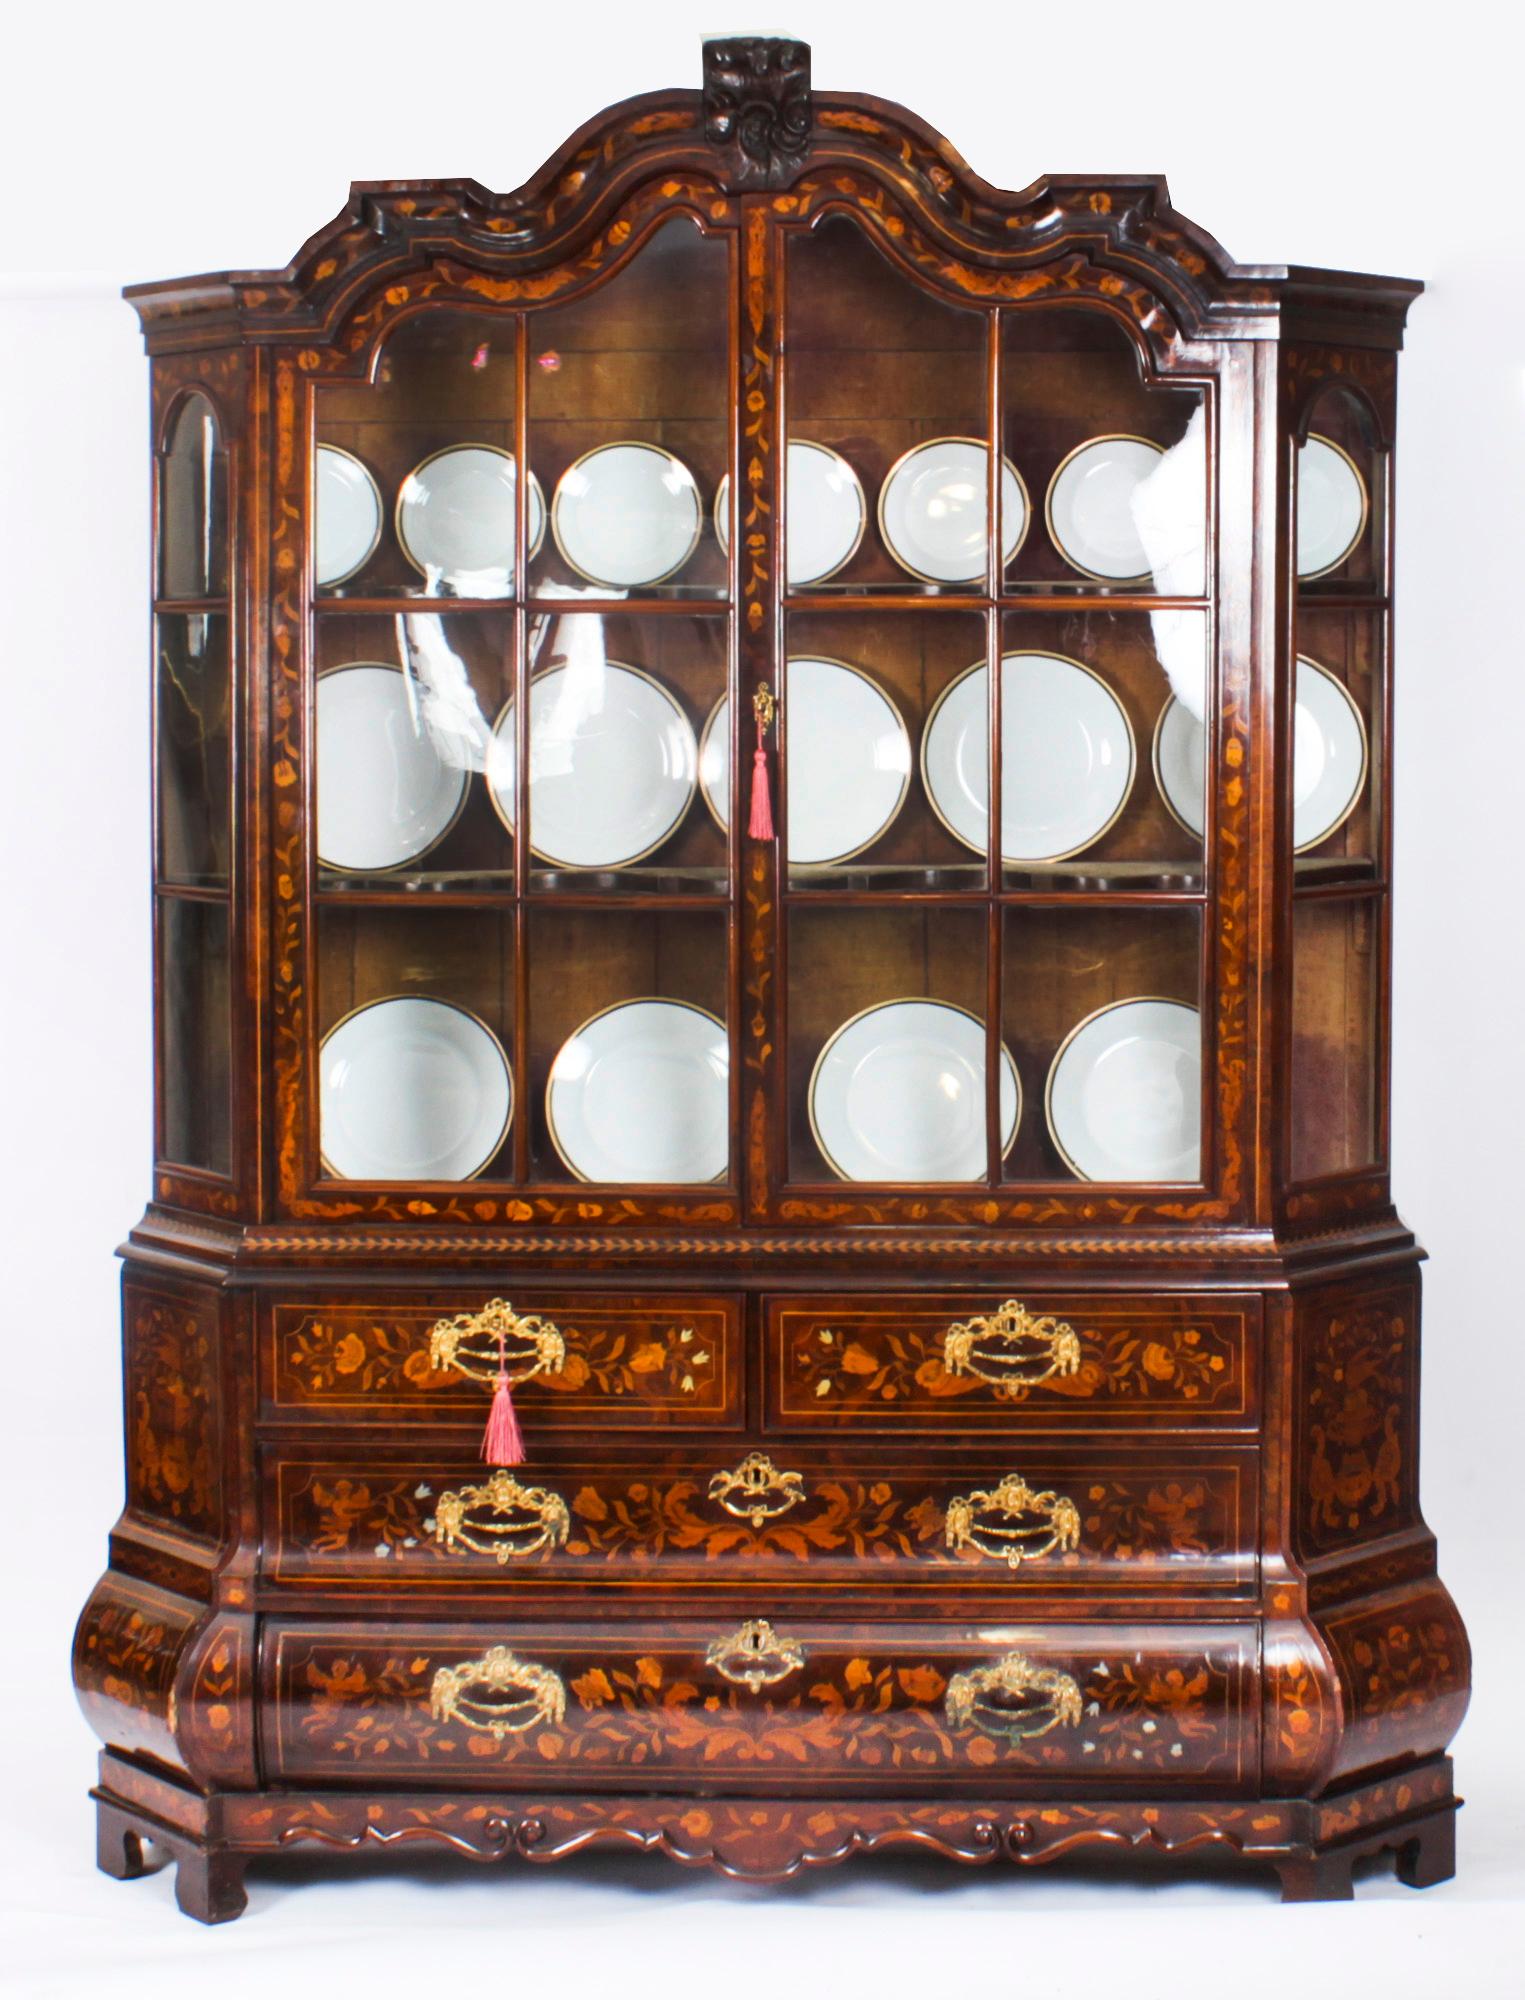 This is a beautiful antique late 18th Century Dutch walnut and marquetry inlaid display cabinet dating from circa 1780.
 
The cabinet is superbly inlaid all over with the most wonderful hand cut marquetry of trailing flowers and foliage.
 
The